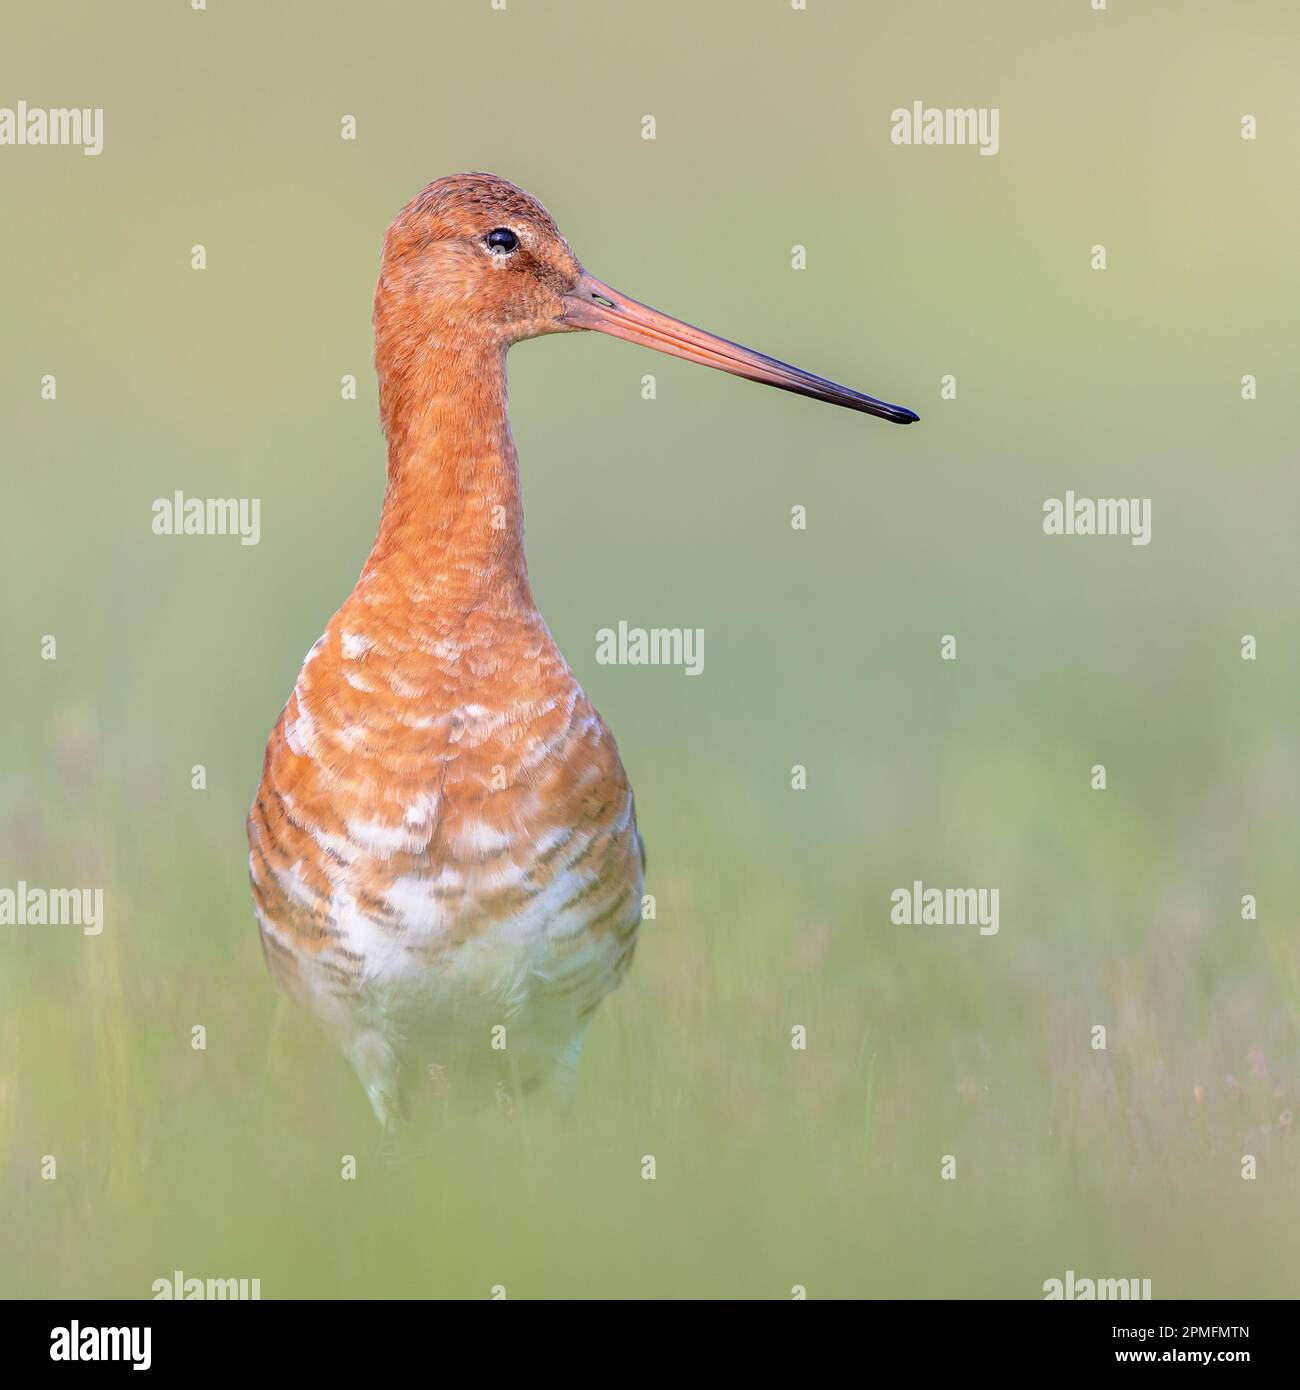 Majestic Black-tailed Godwit (Limosa limosa) wader bird looking in the camera. This species is breeding in the Dutch coastal areas. About half of the Stock Photo